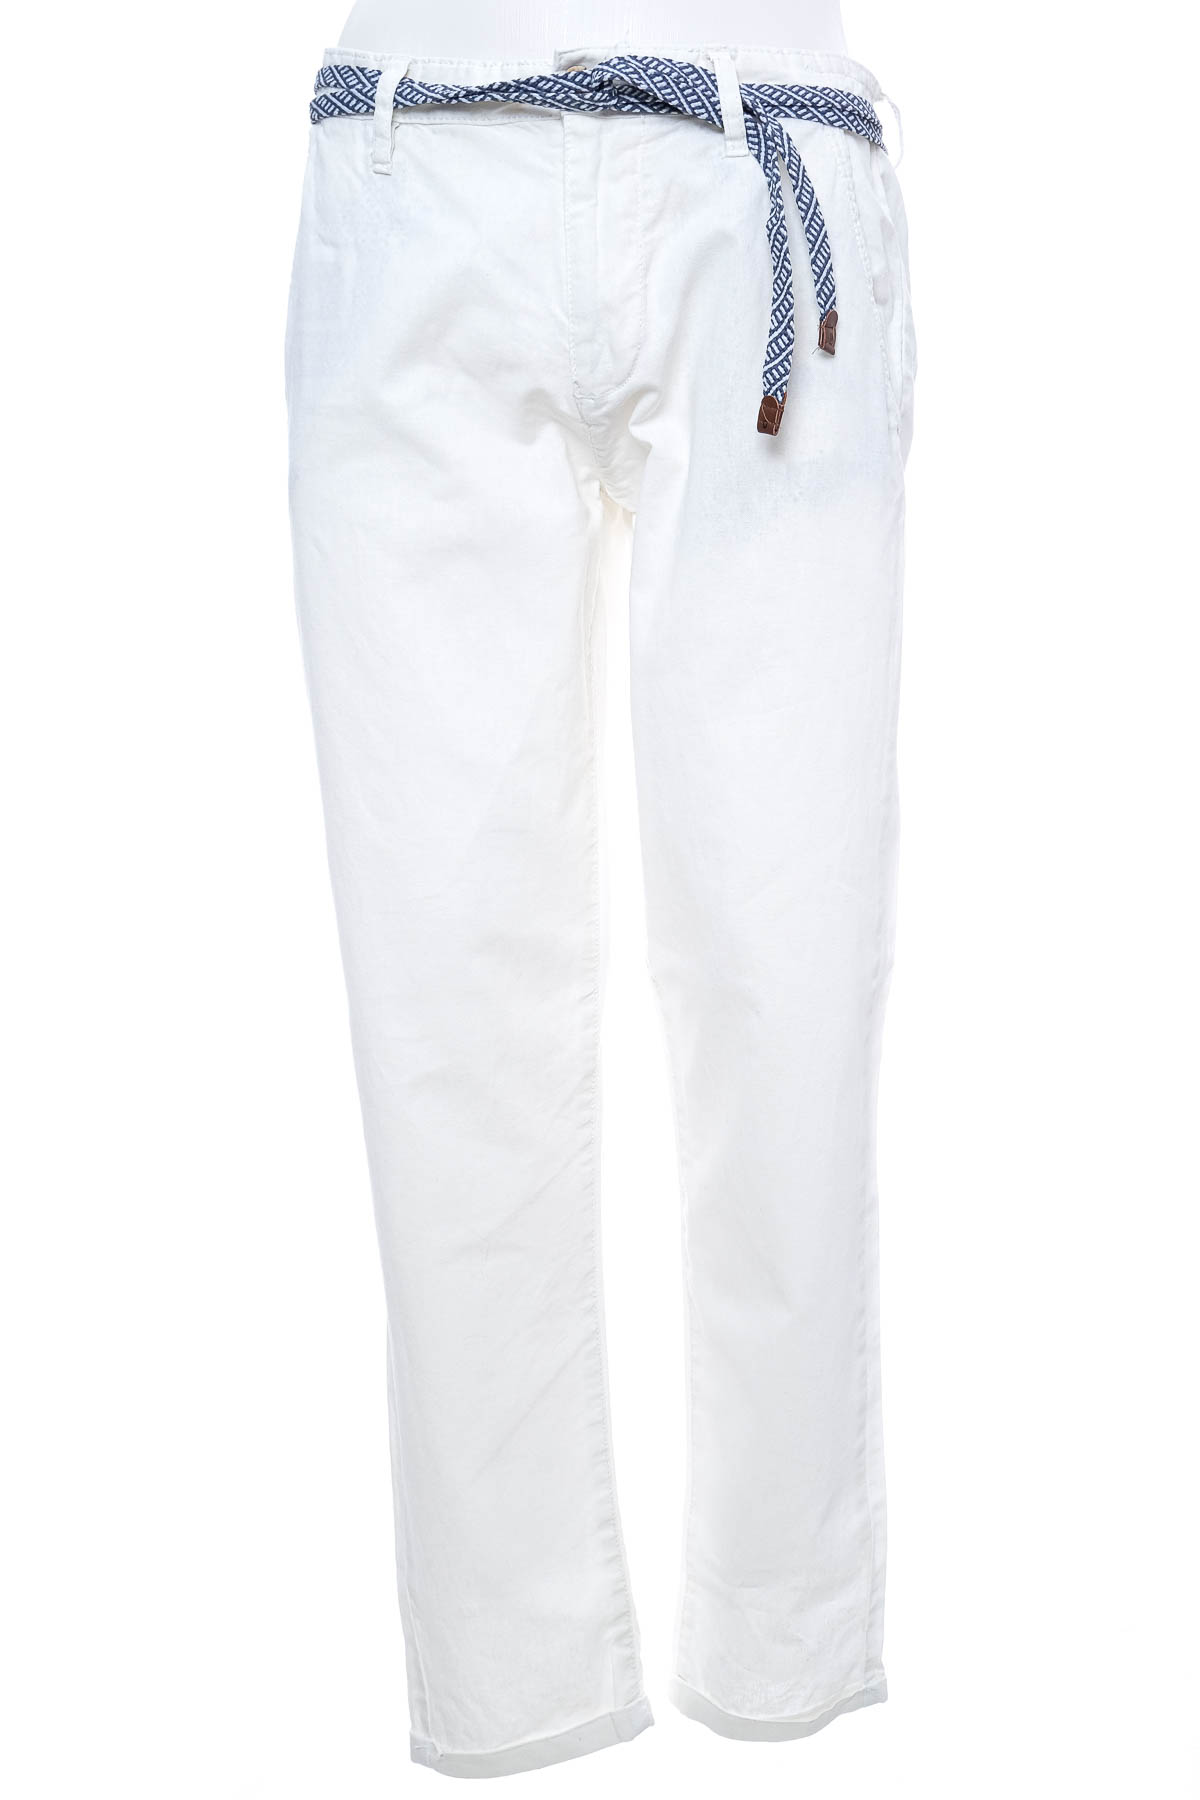 Men's trousers - INDICODE JEANS - 0